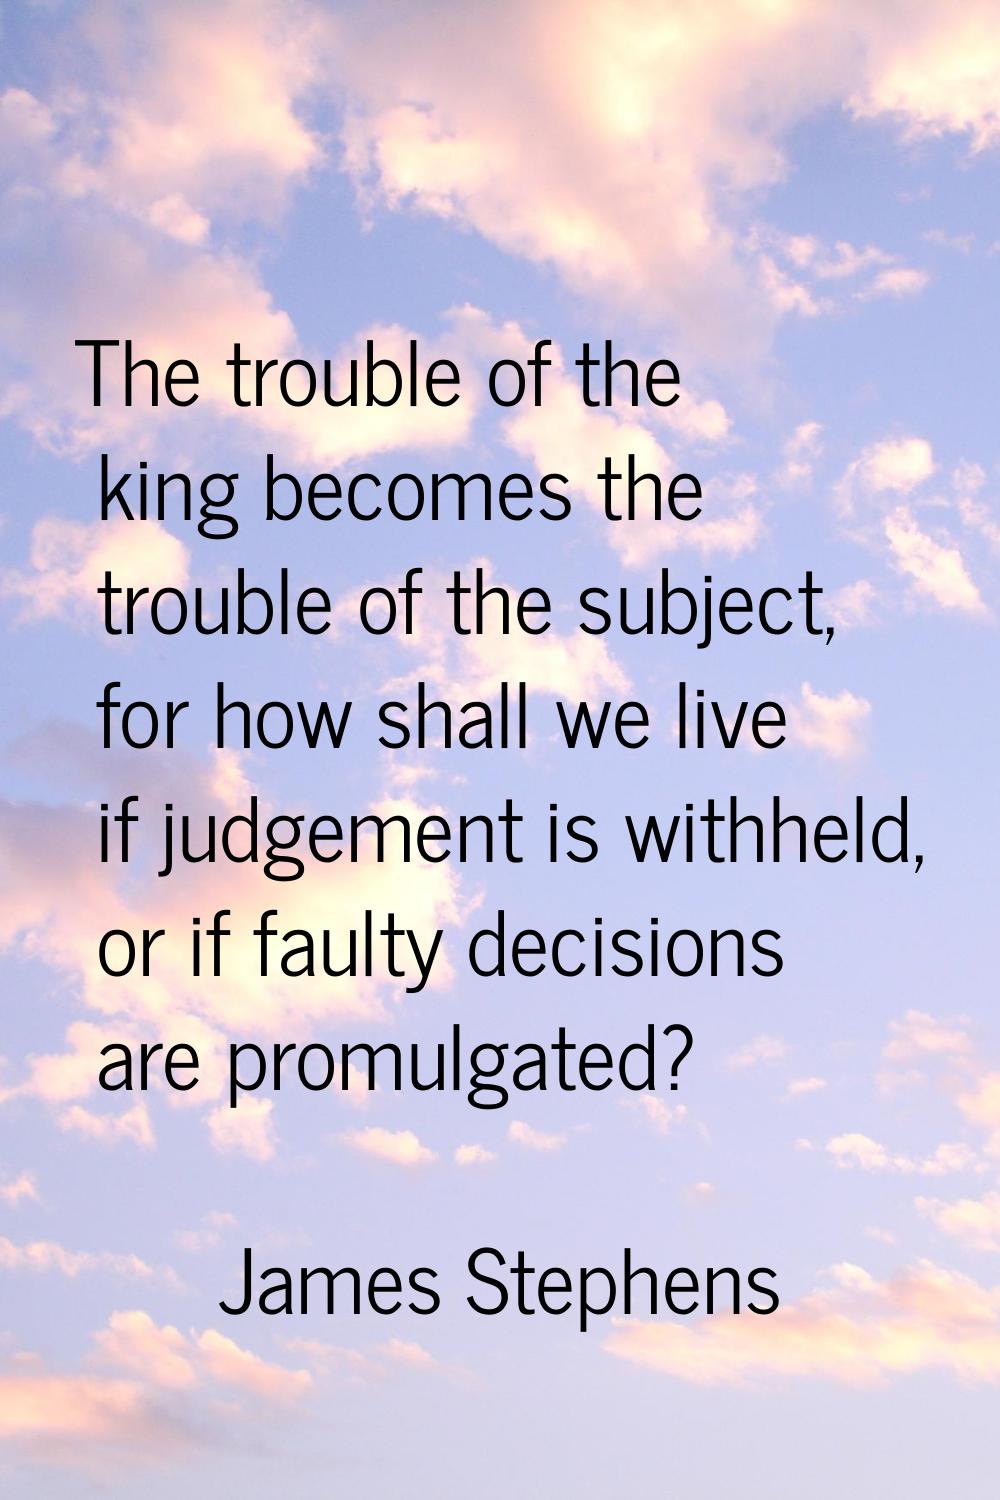 The trouble of the king becomes the trouble of the subject, for how shall we live if judgement is w